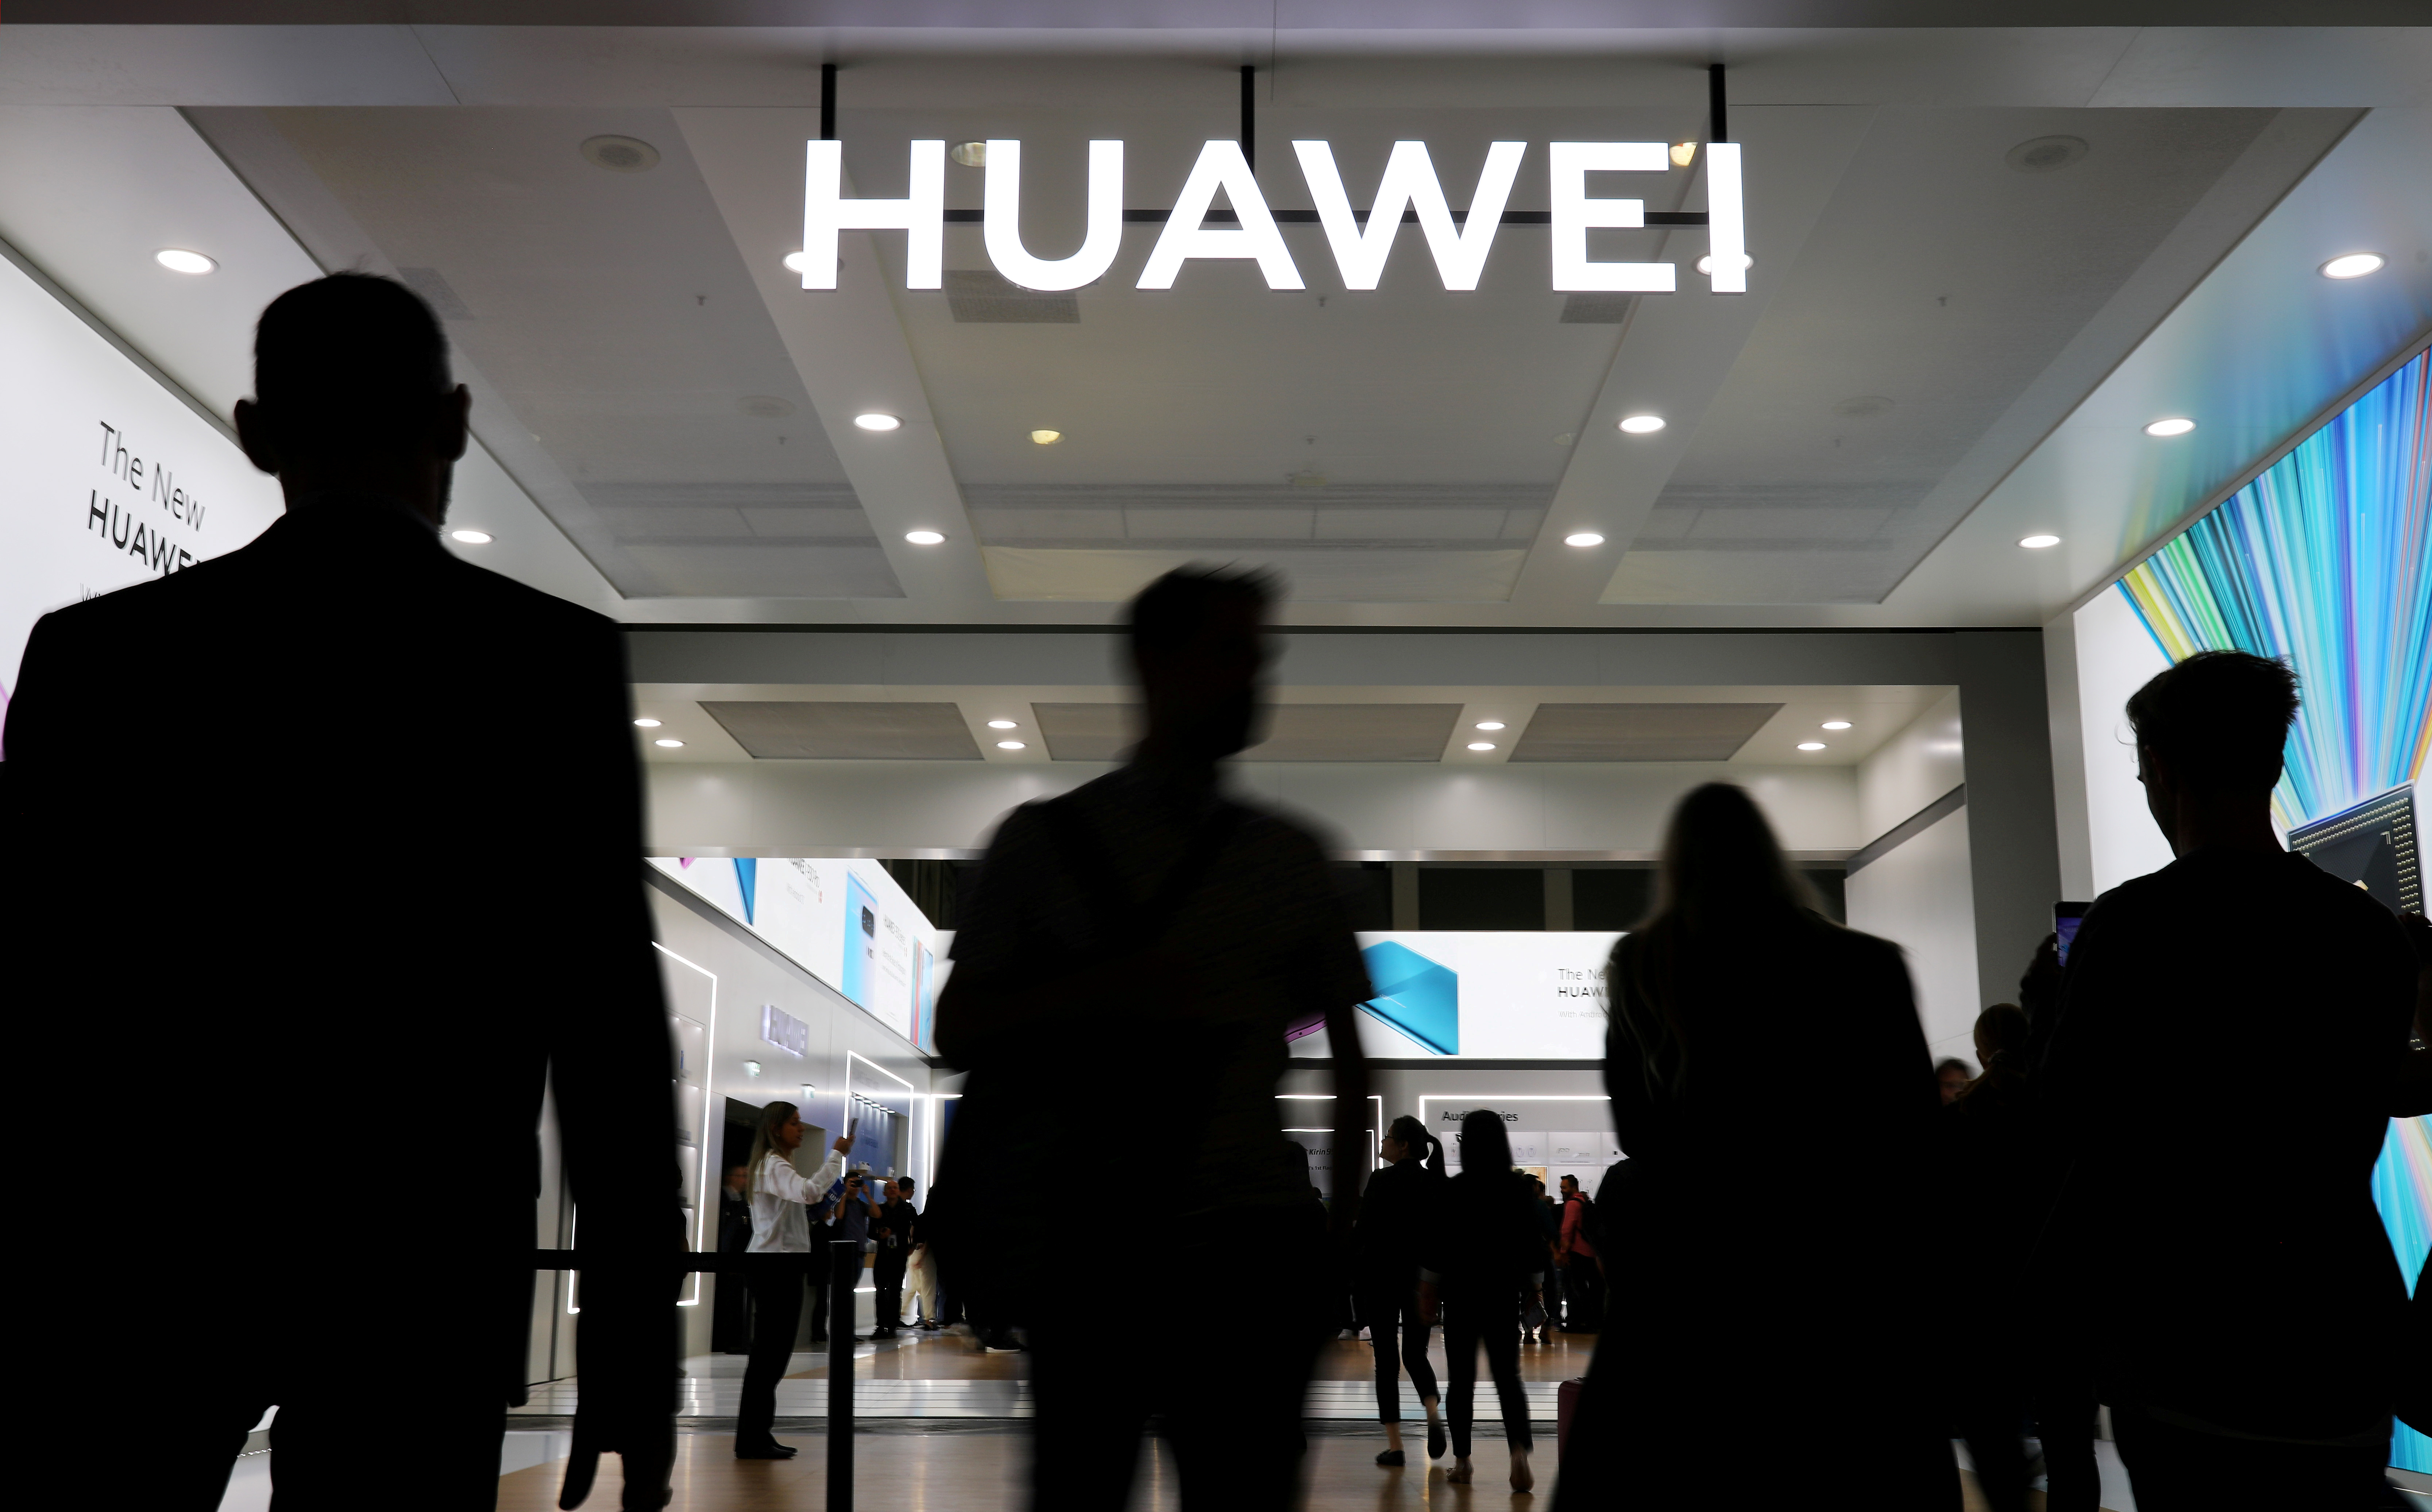 FILE PHOTO: The Huawei logo is pictured at the IFA consumer tech fair in Berlin, Germany, September 6, 2019. REUTERS/Hannibal Hanschke/File Photo